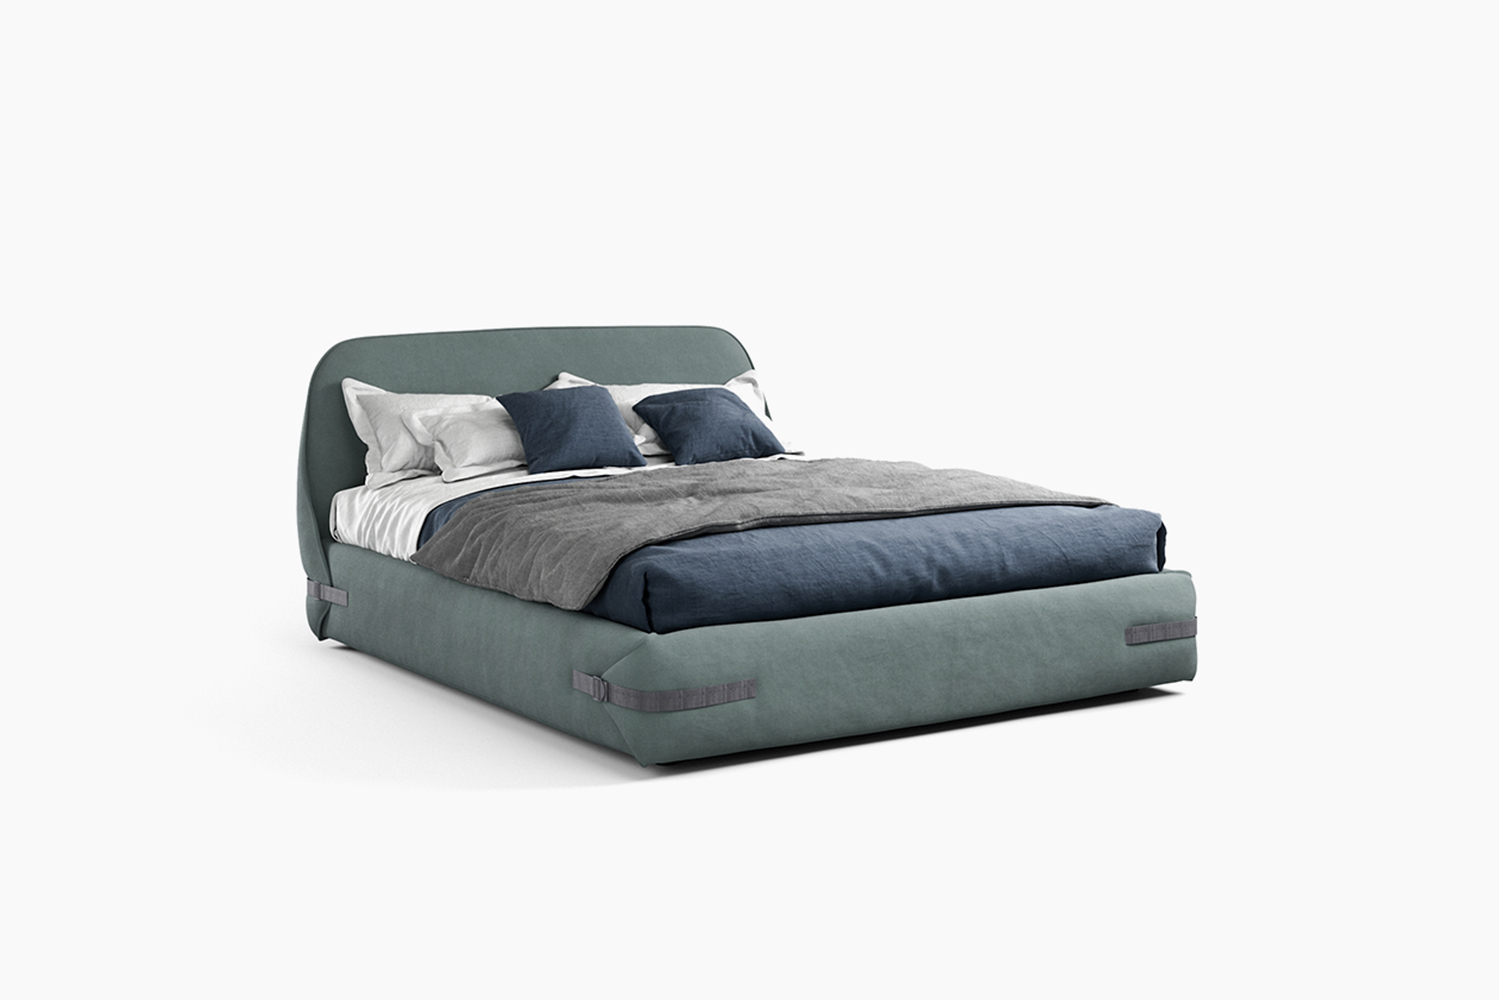 Tape luxury, modern, contemporary Italian bed by Novamobili. Sold by Krieder UK.